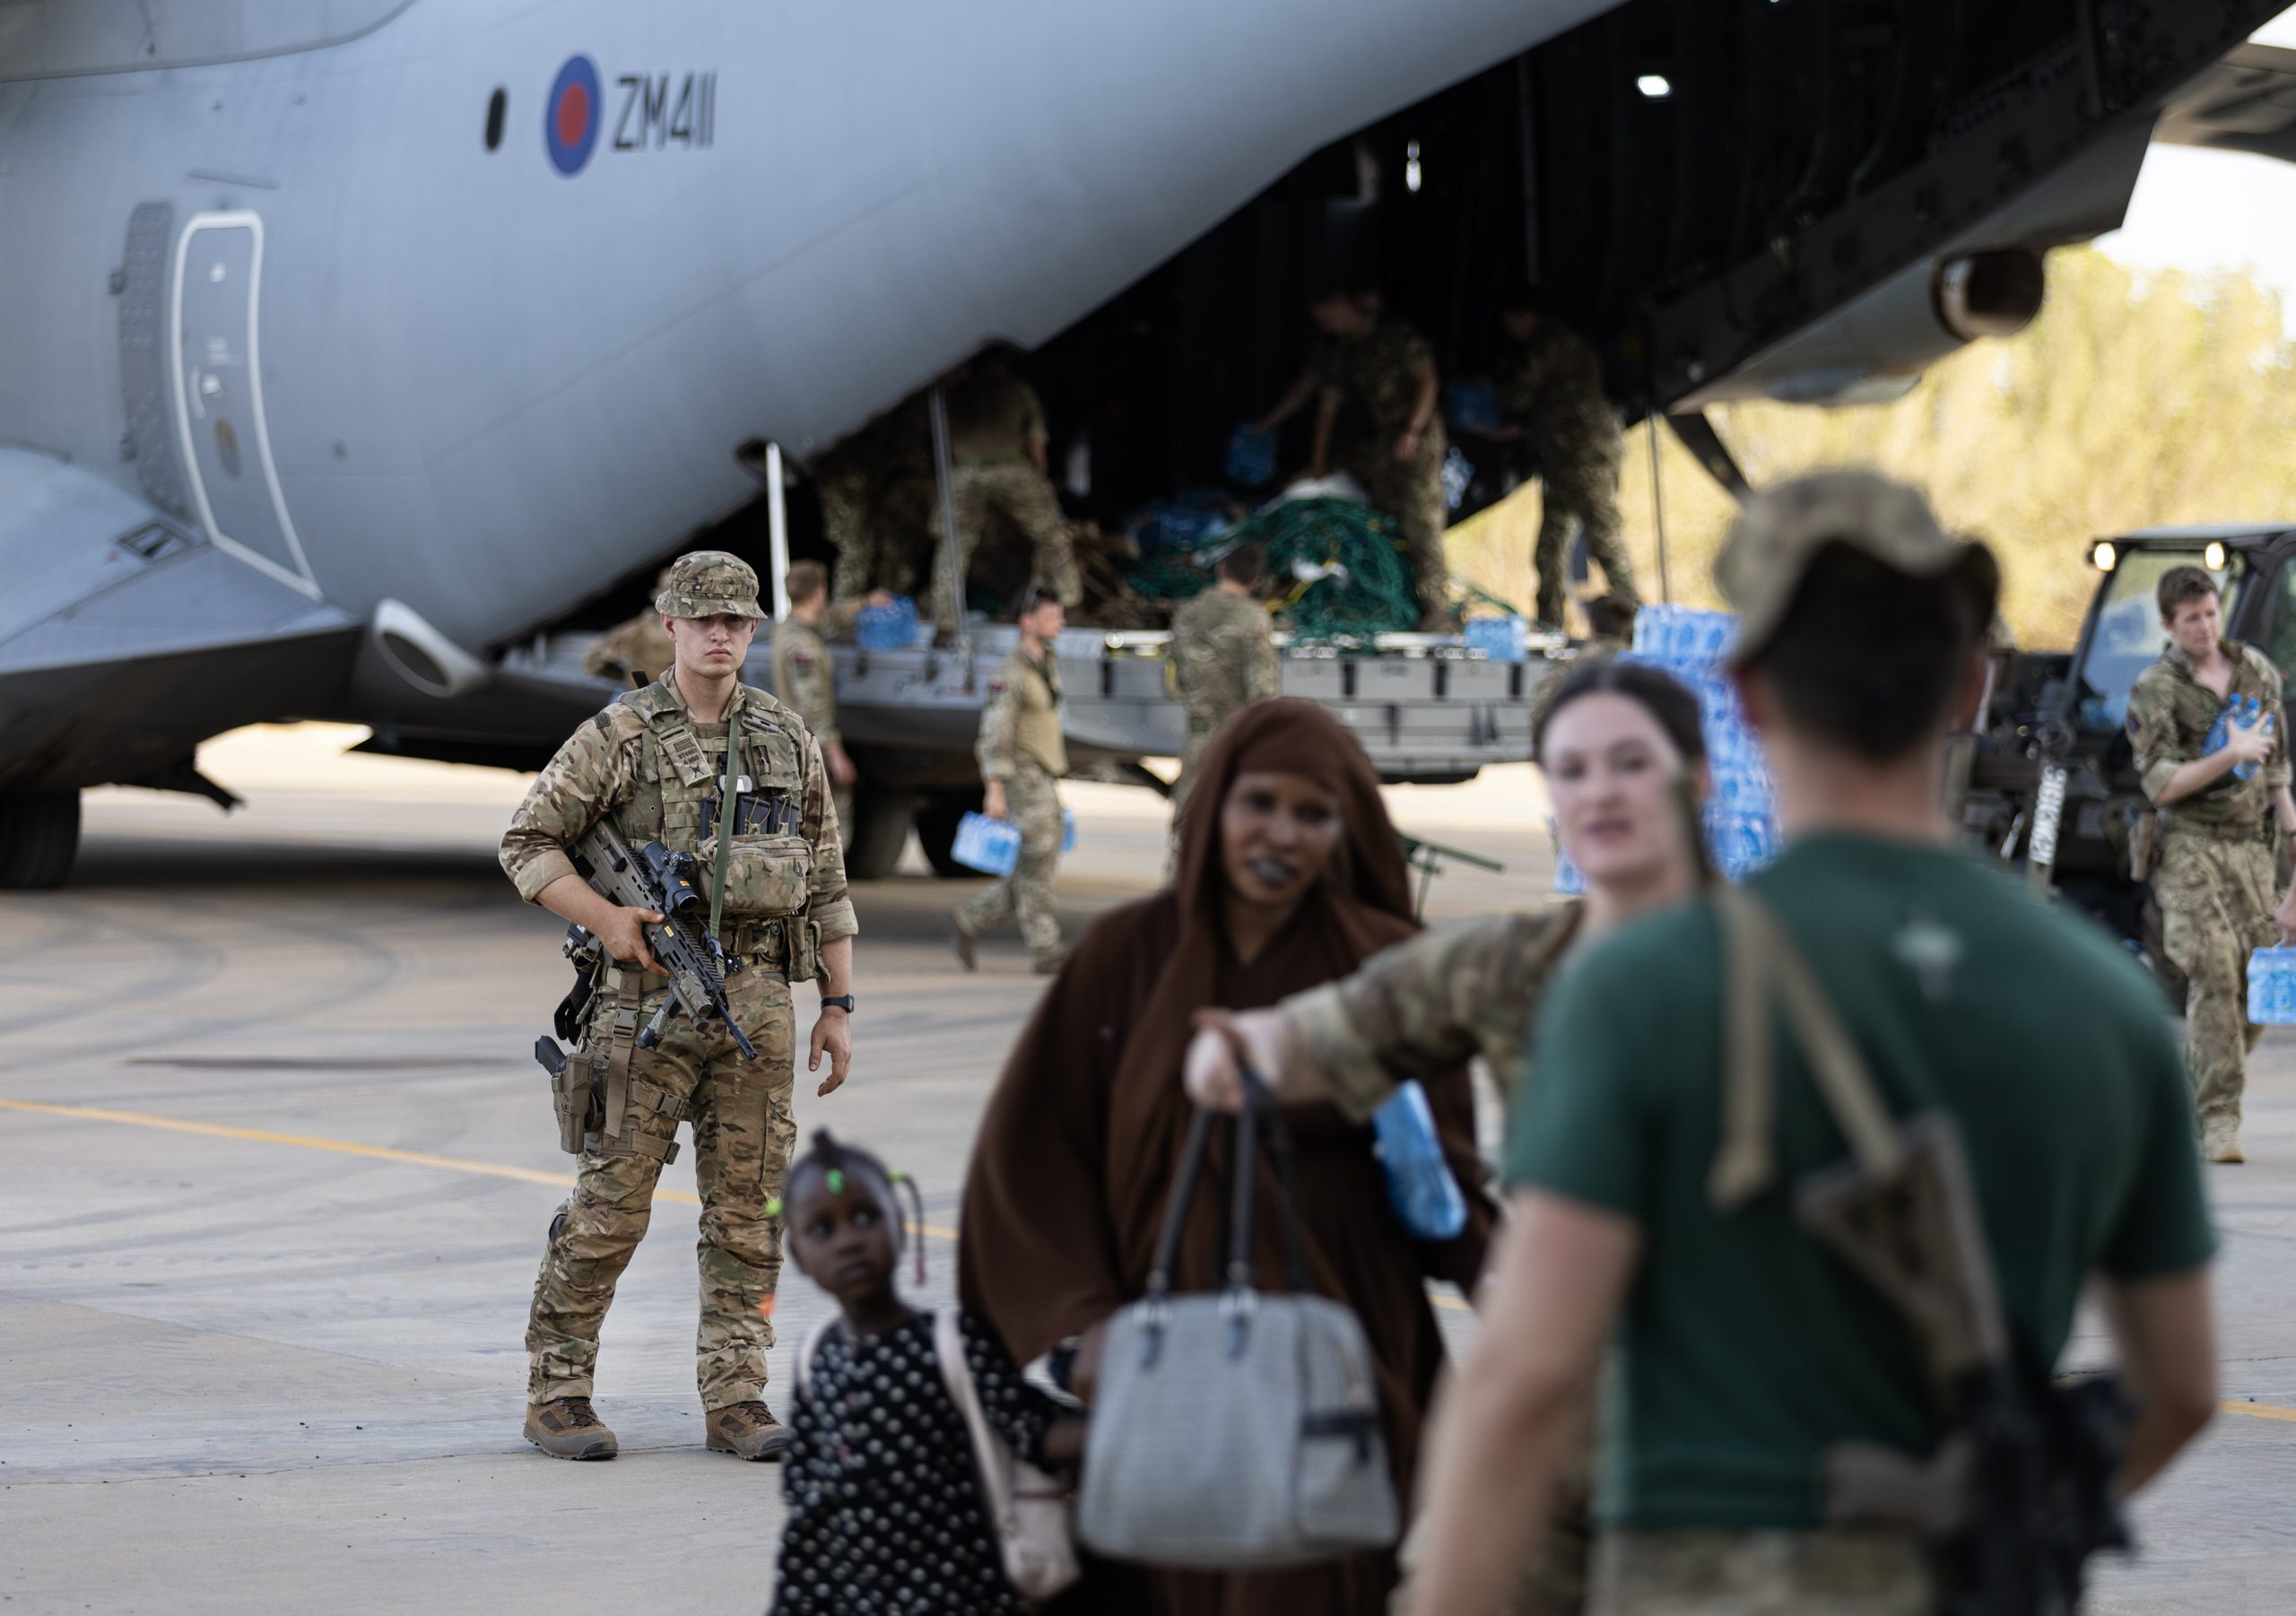 UK Hands Operations At Wadi Seidna Airfield Back To Sudanese Authorities After Successful Evacuations